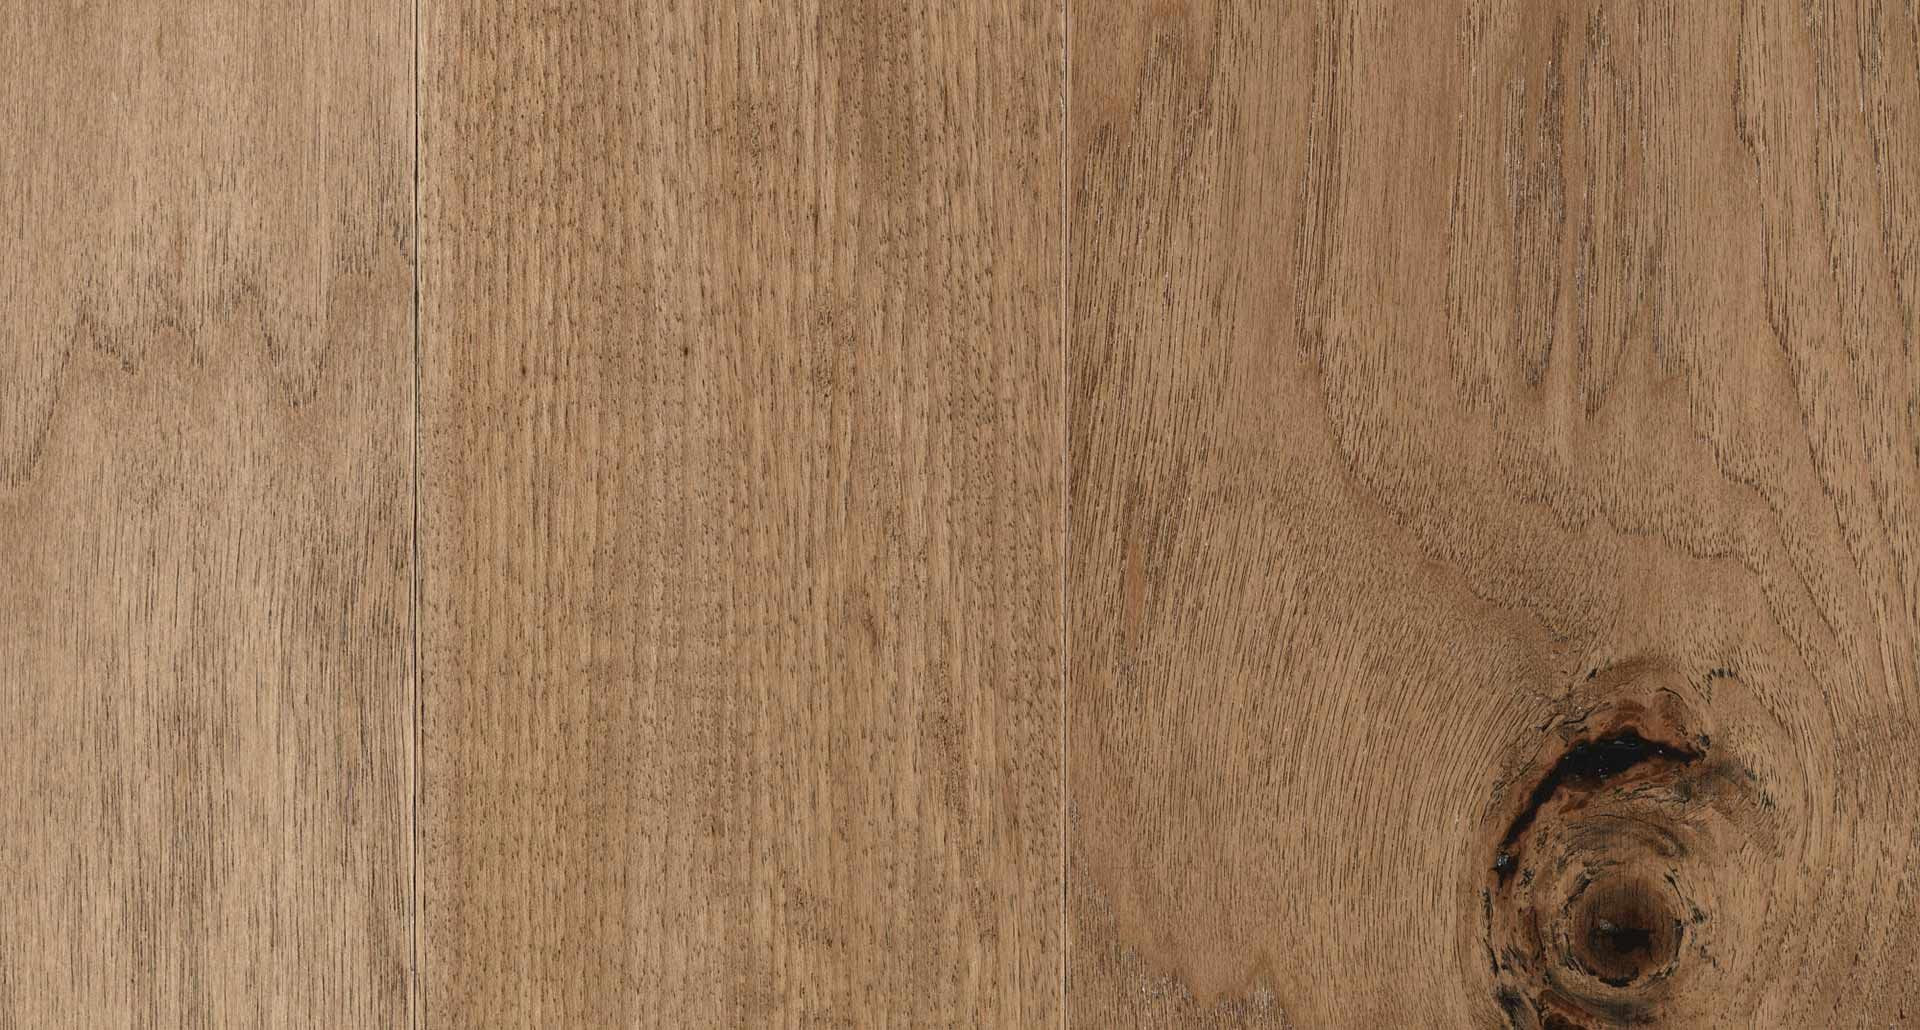 17 Fashionable Recommended Humidity Level for Hardwood Floors 2024 free download recommended humidity level for hardwood floors of falls river hickory wire brushed engineered hardwood floor golden pertaining to falls river hickory wire brushed engineered hardwood floor g